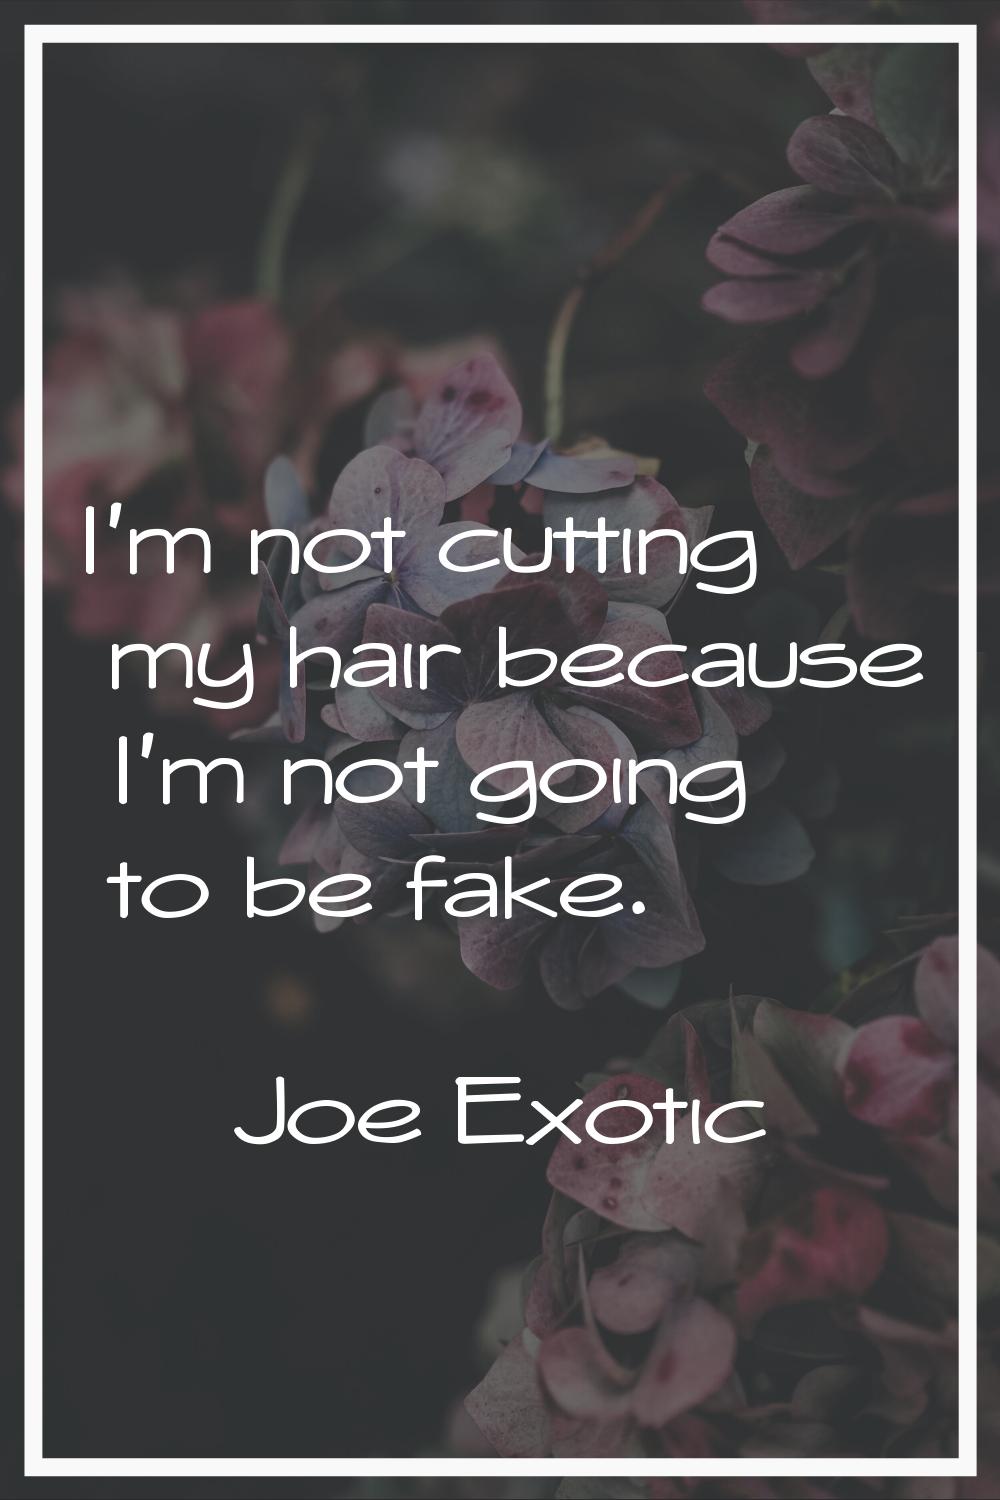 I'm not cutting my hair because I'm not going to be fake.